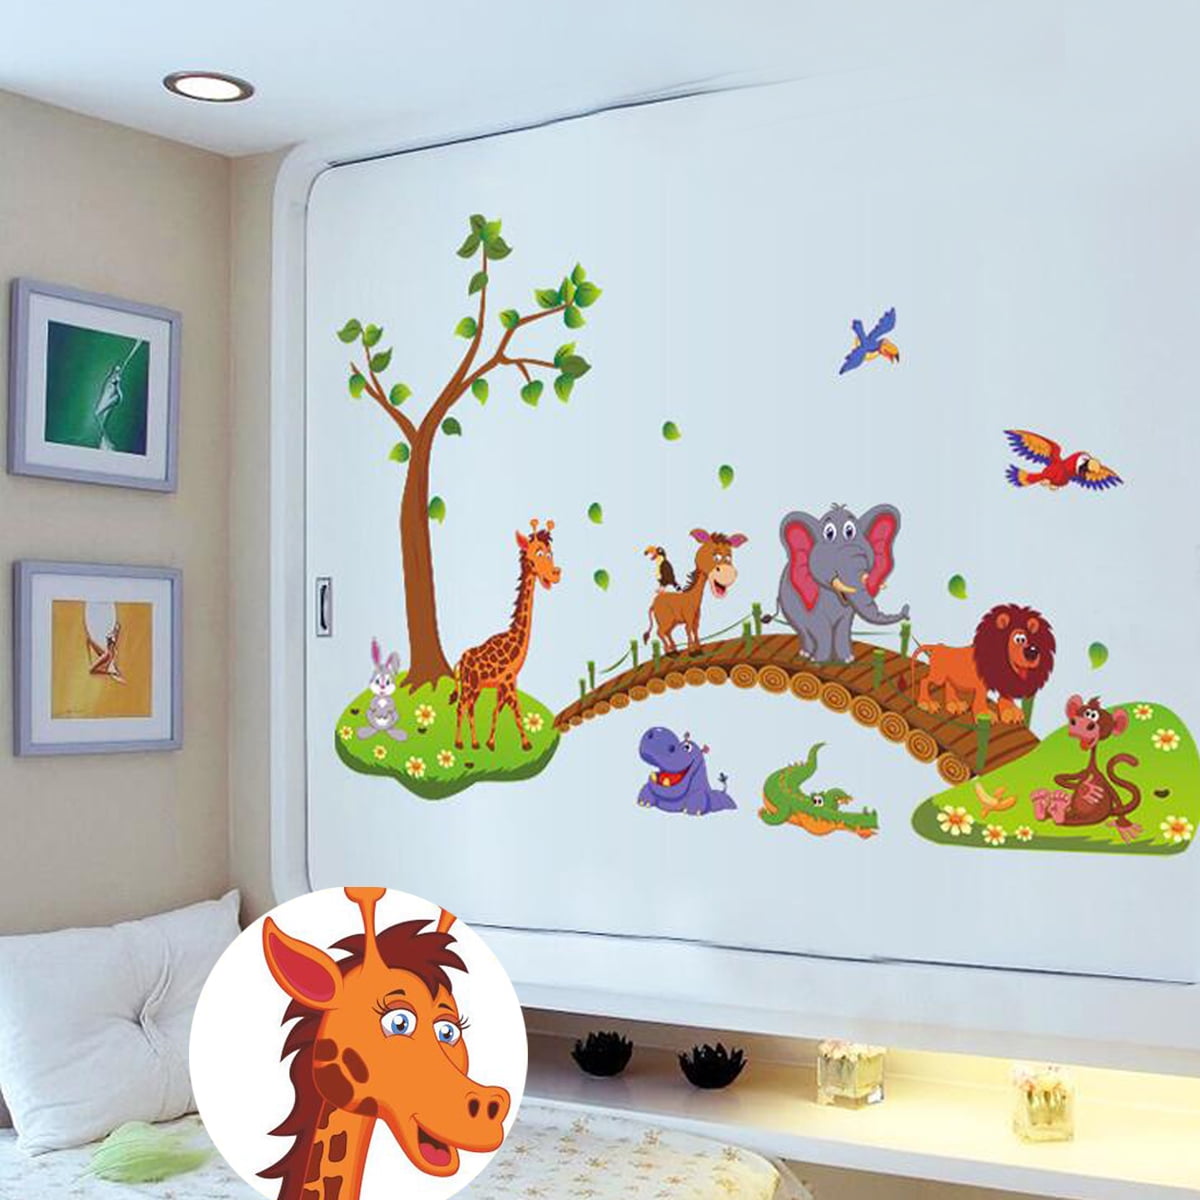 Details about   Removable Sticker Animal Roller Style Wall Stickers For Nursery Room Decor CA 